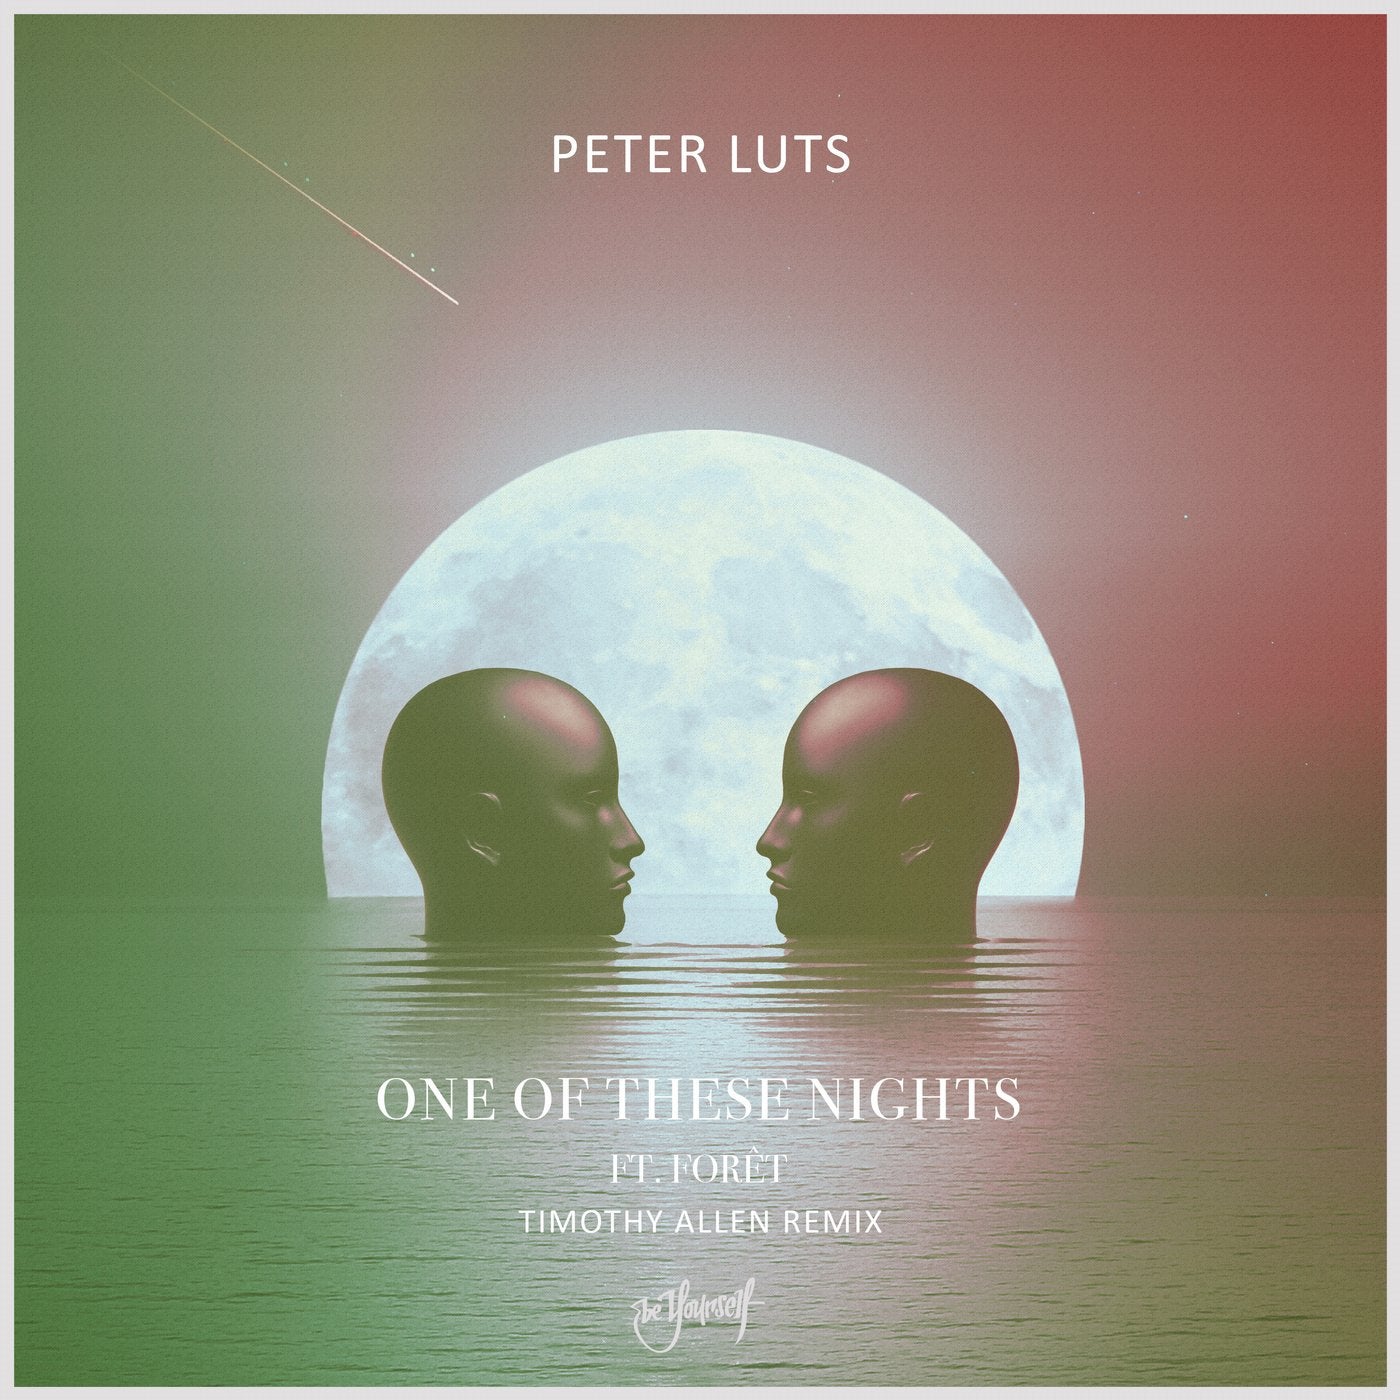 One Of These Nights (feat. Foret) (Timothy Allen Remix)